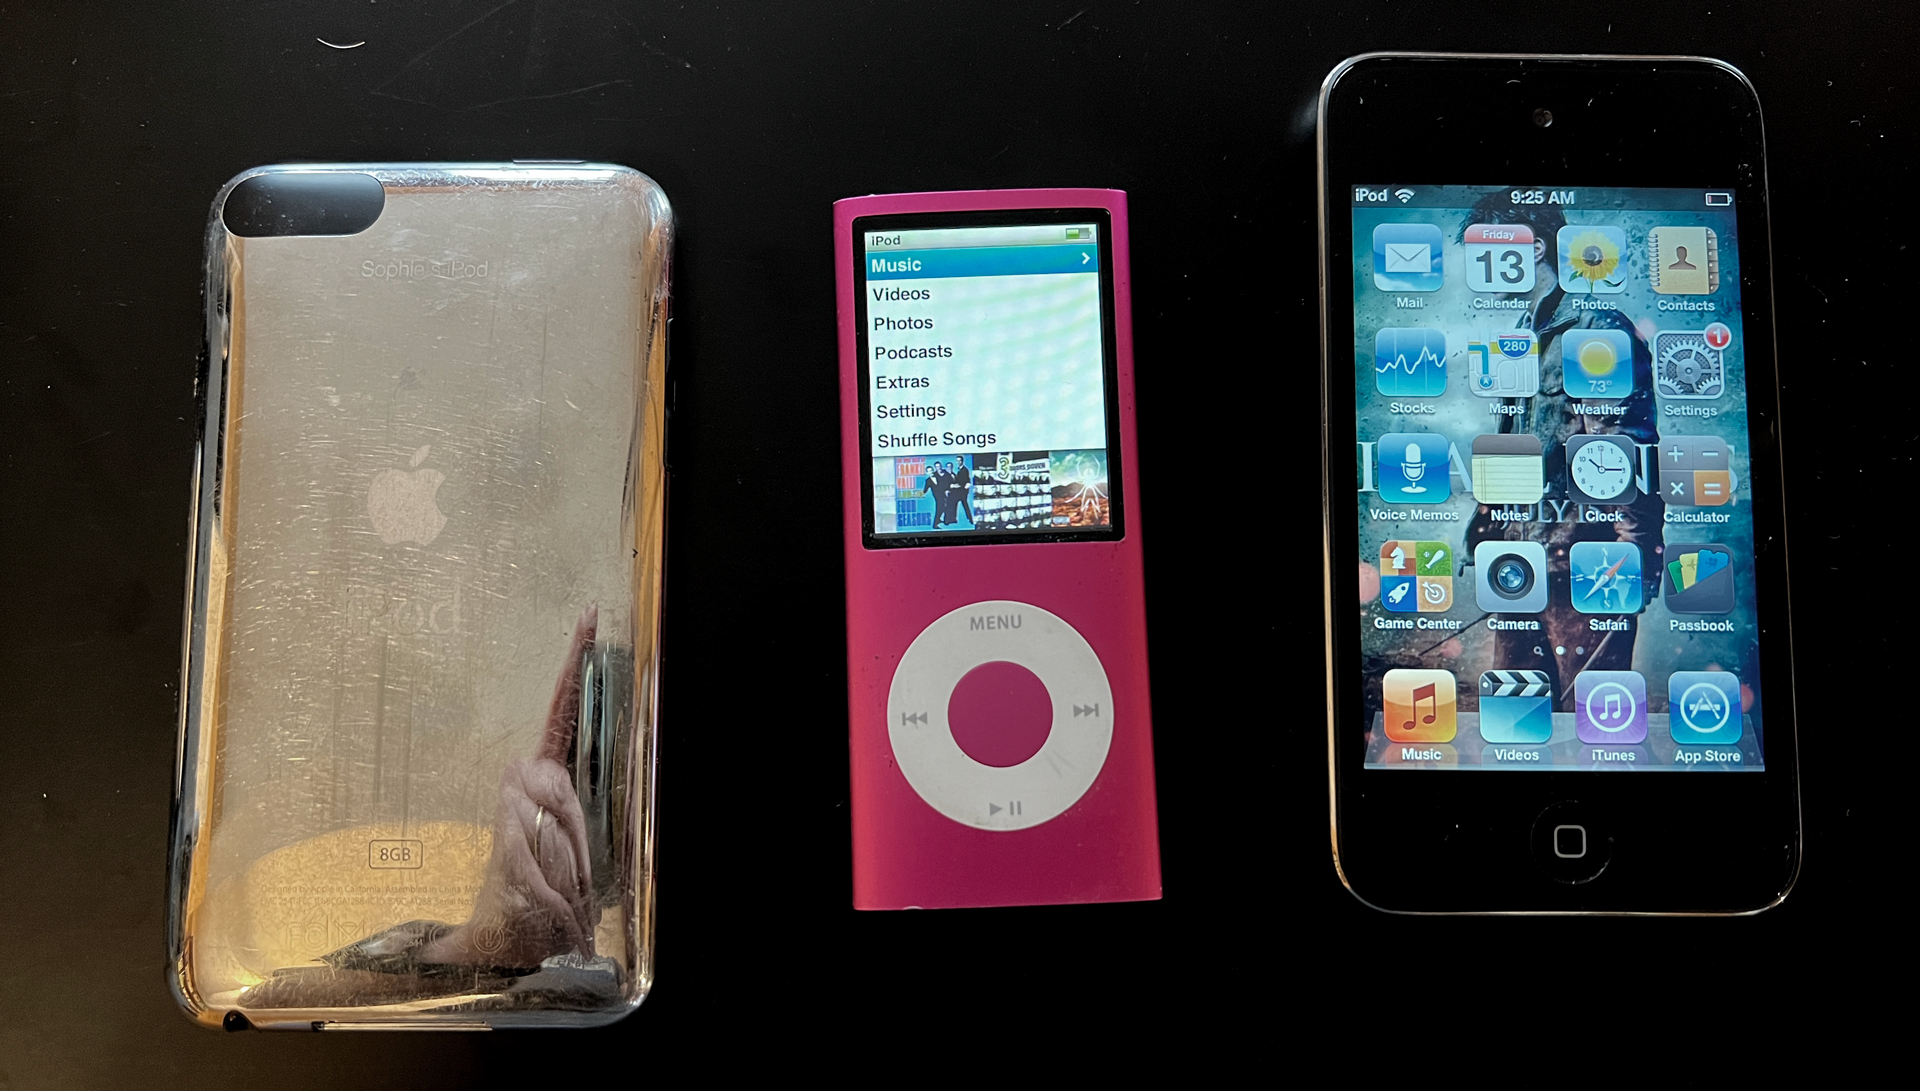 Apple’s iPod touch sells out for the last time, because it’s still awesome